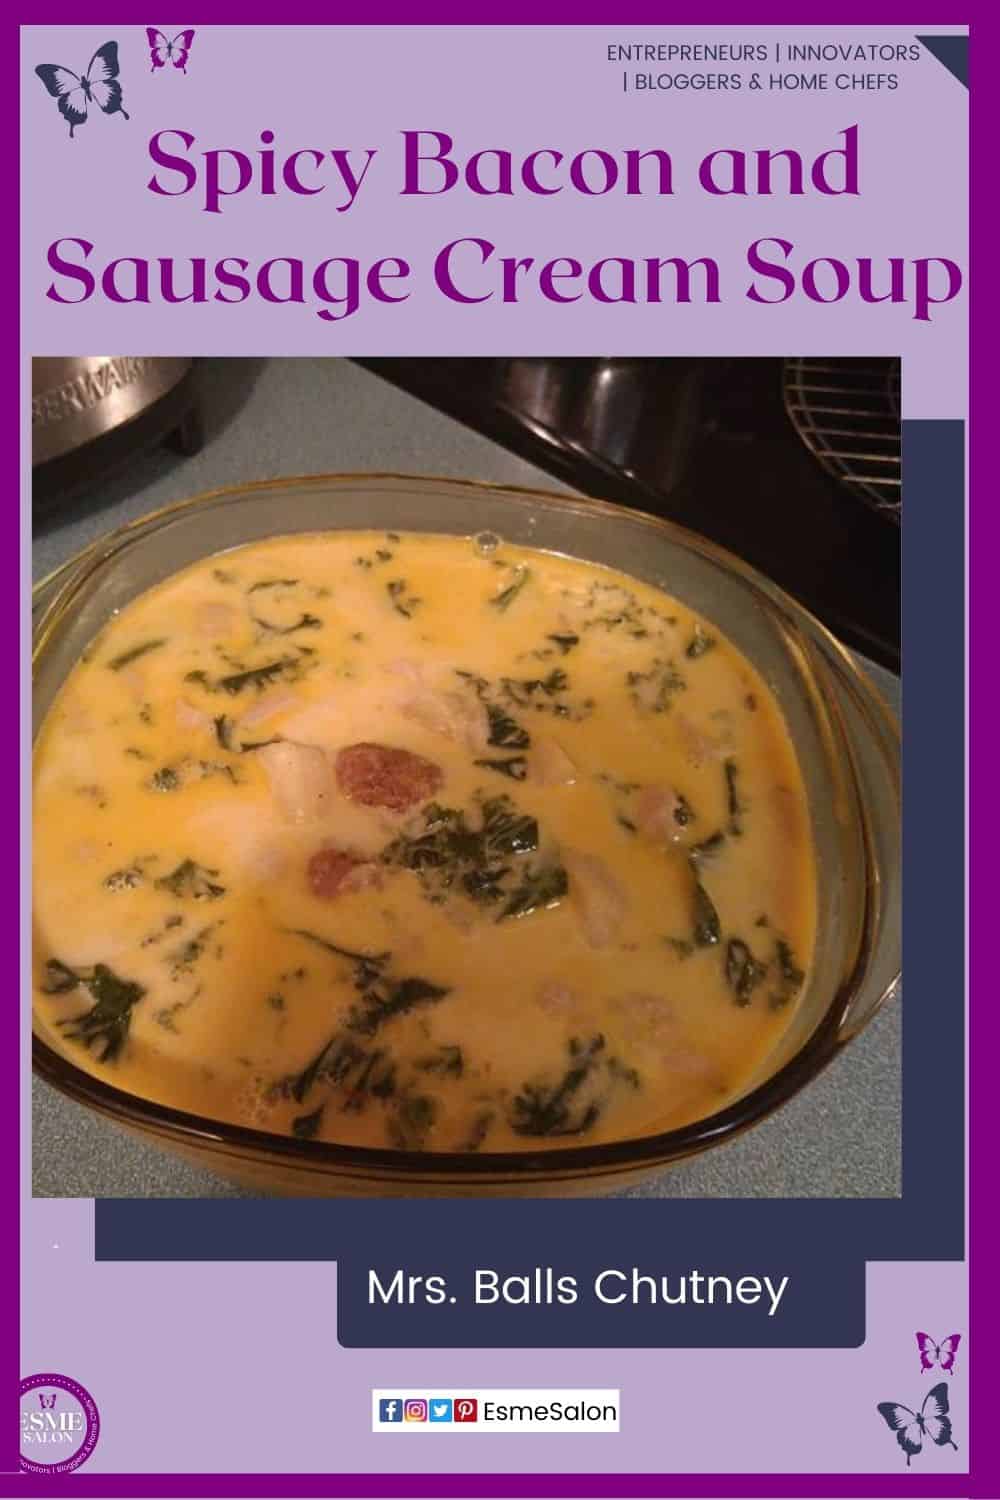 an image of Spicy Bacon and Sausage Cream Soup